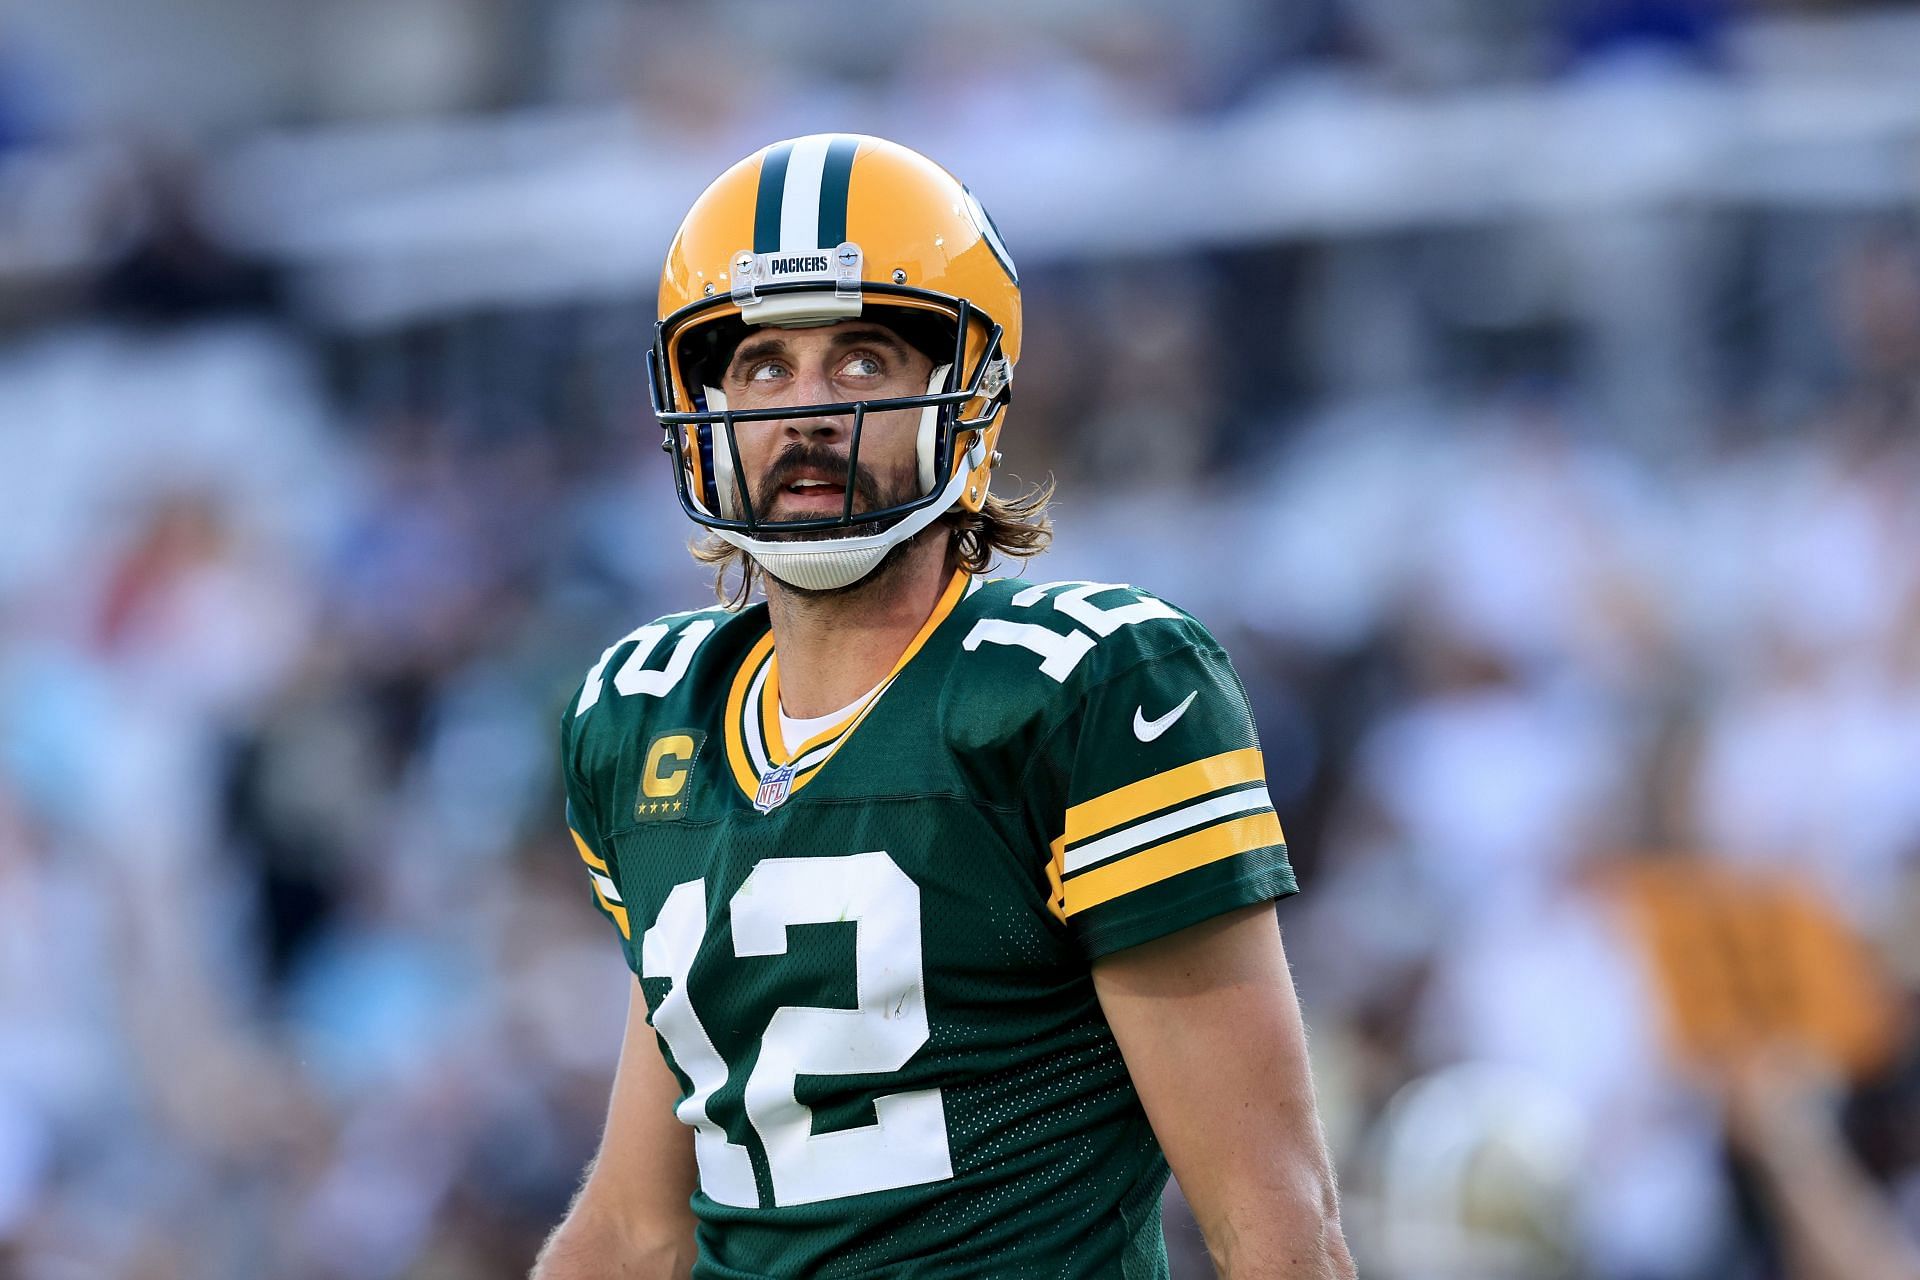 Colin Cowherd discusses Aaron Rodgers and team talent